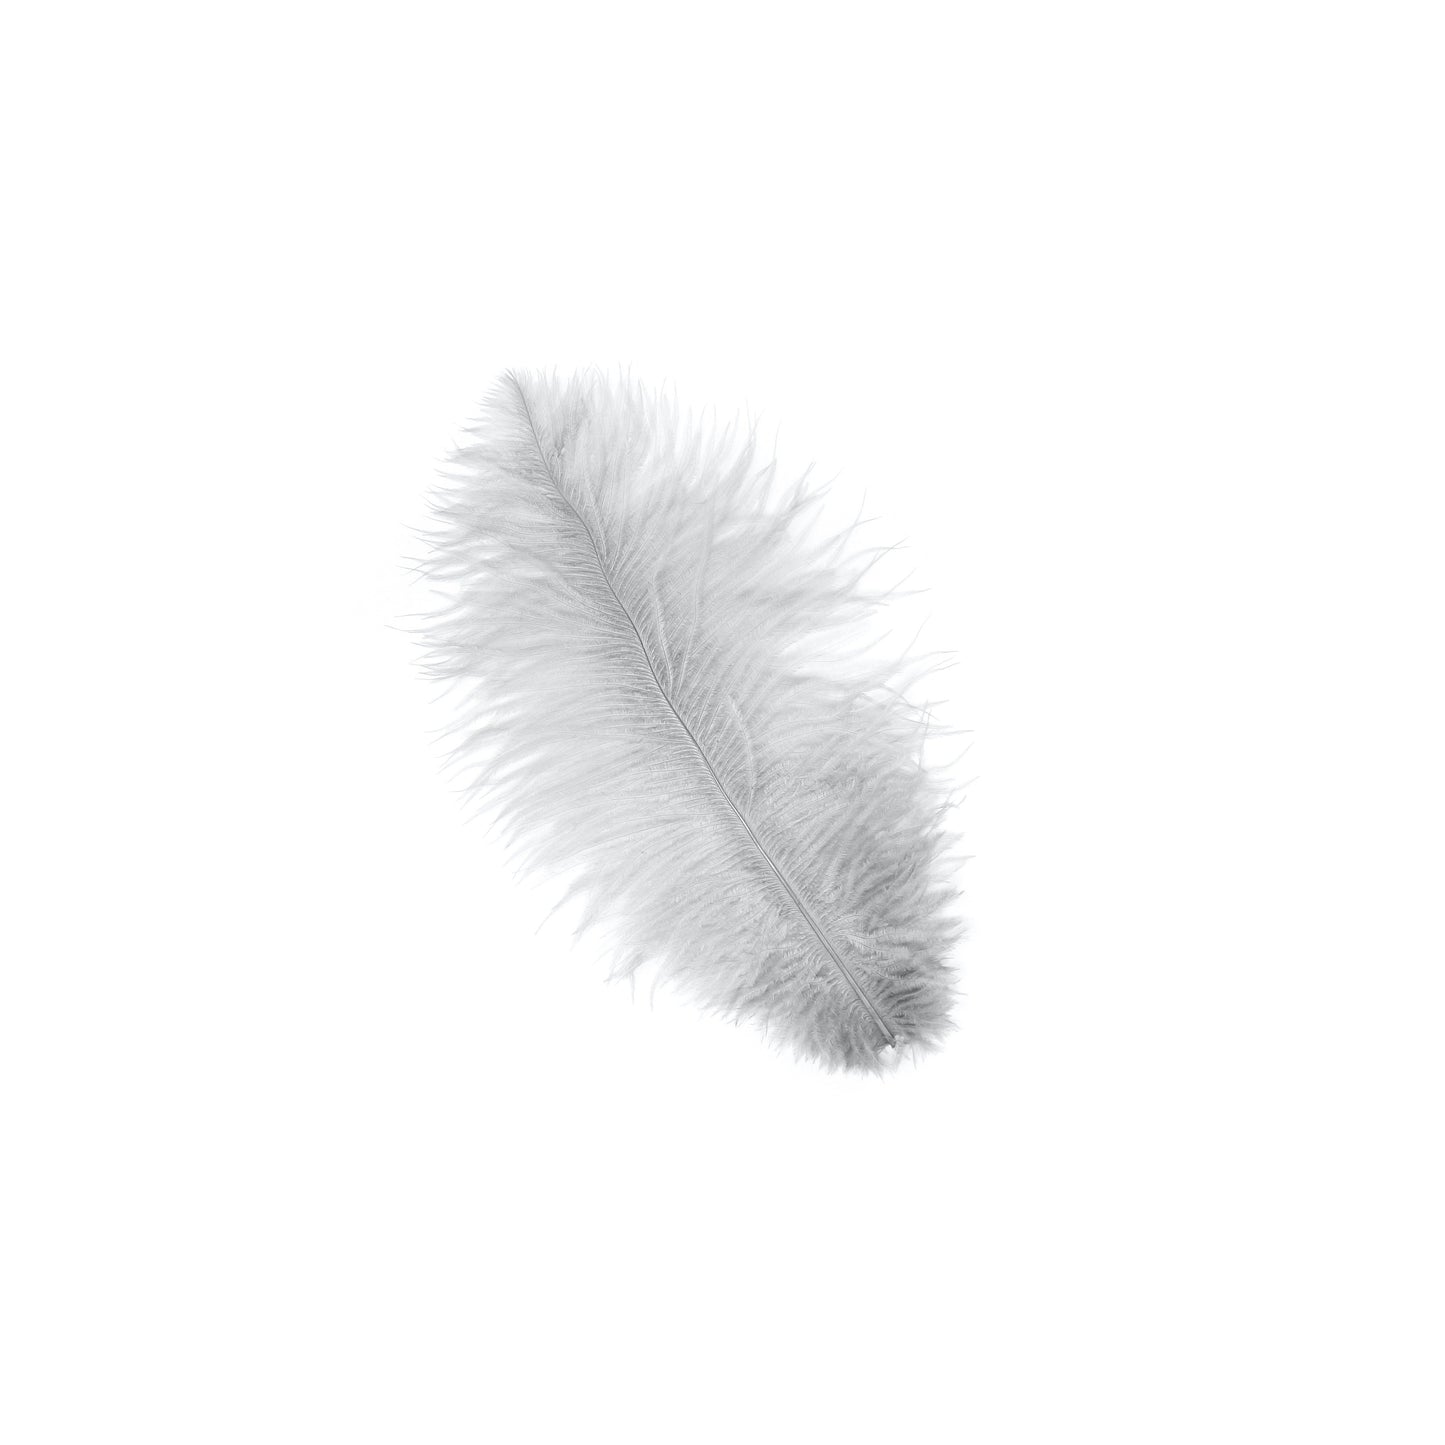 Ostrich Feathers 9-12" Drabs - Silver